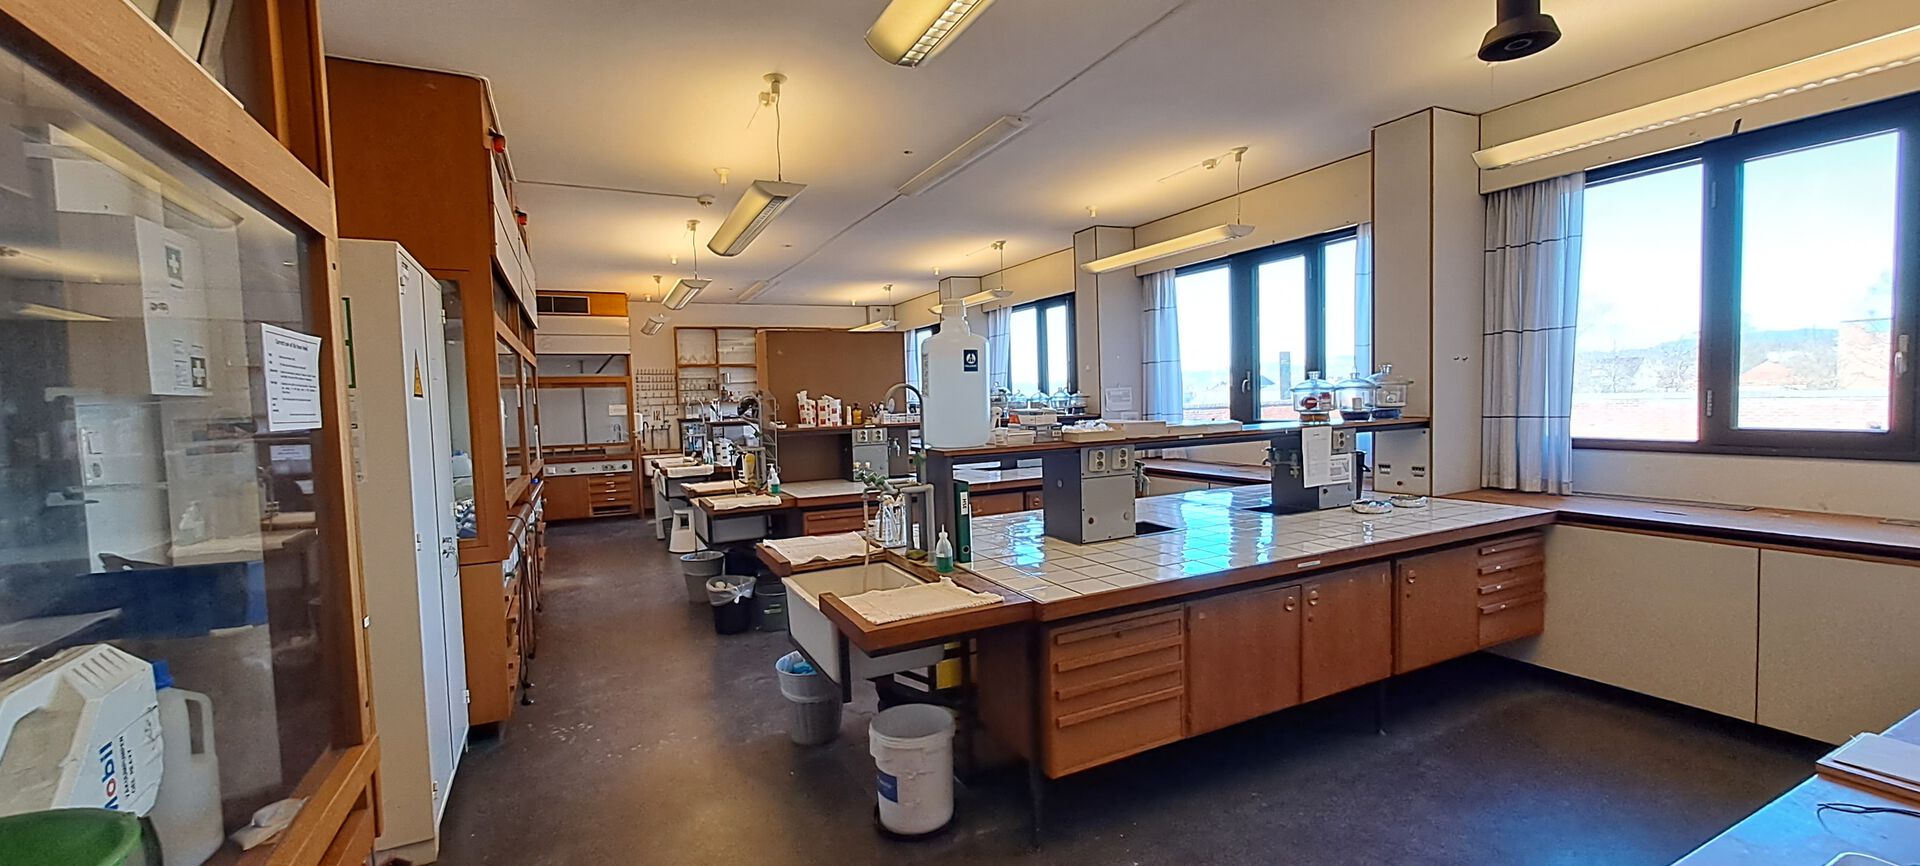 The main laboratory of NAFUMA, it's large with several fumehoods and benches.